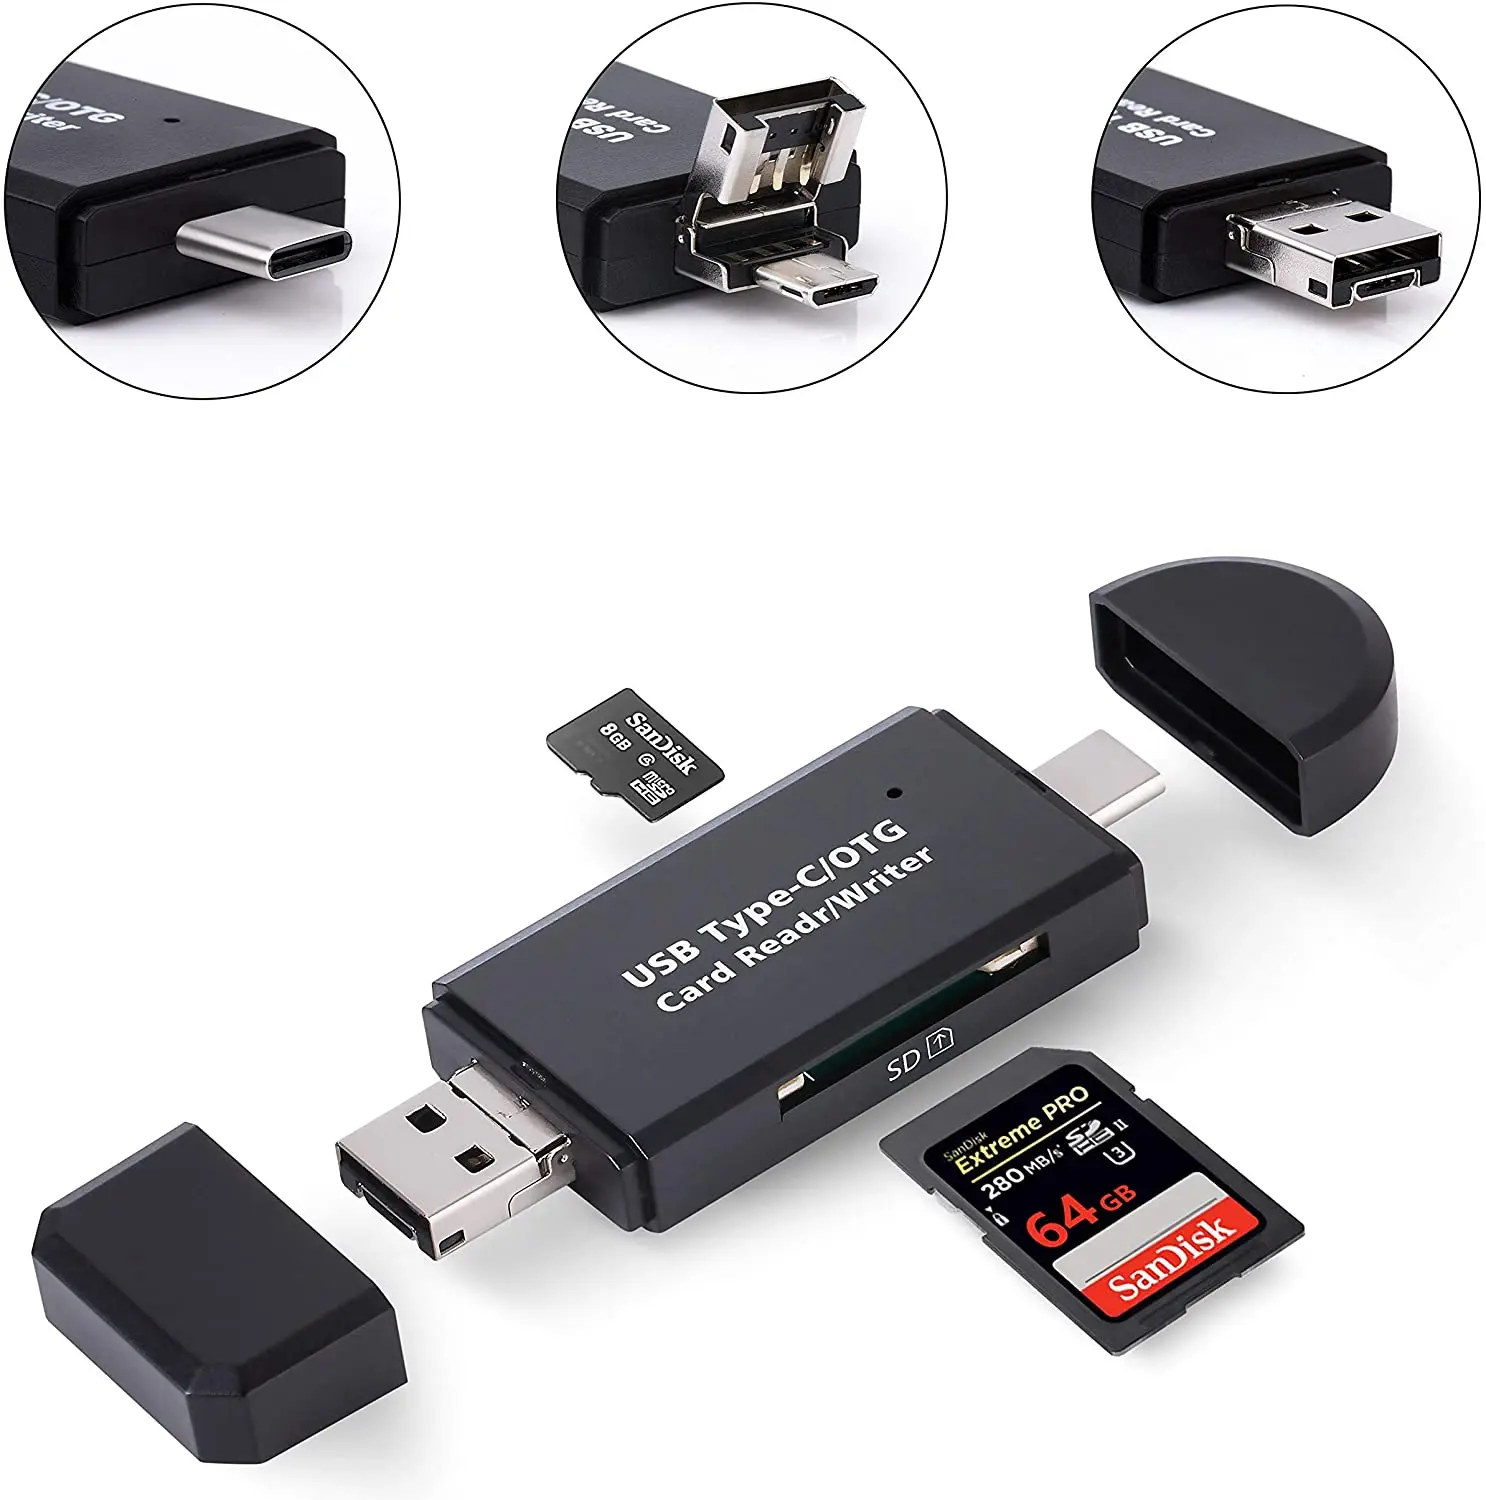 lufthavn Isse Guggenheim Museum High Speed Mini Usb 2.0 Micro Sd Card Reader Tf Wireless Card Reader - Buy  Wireless Card Reader,Sd Card Reader Usb 2.0,Card Reader Tf Product on  Alibaba.com